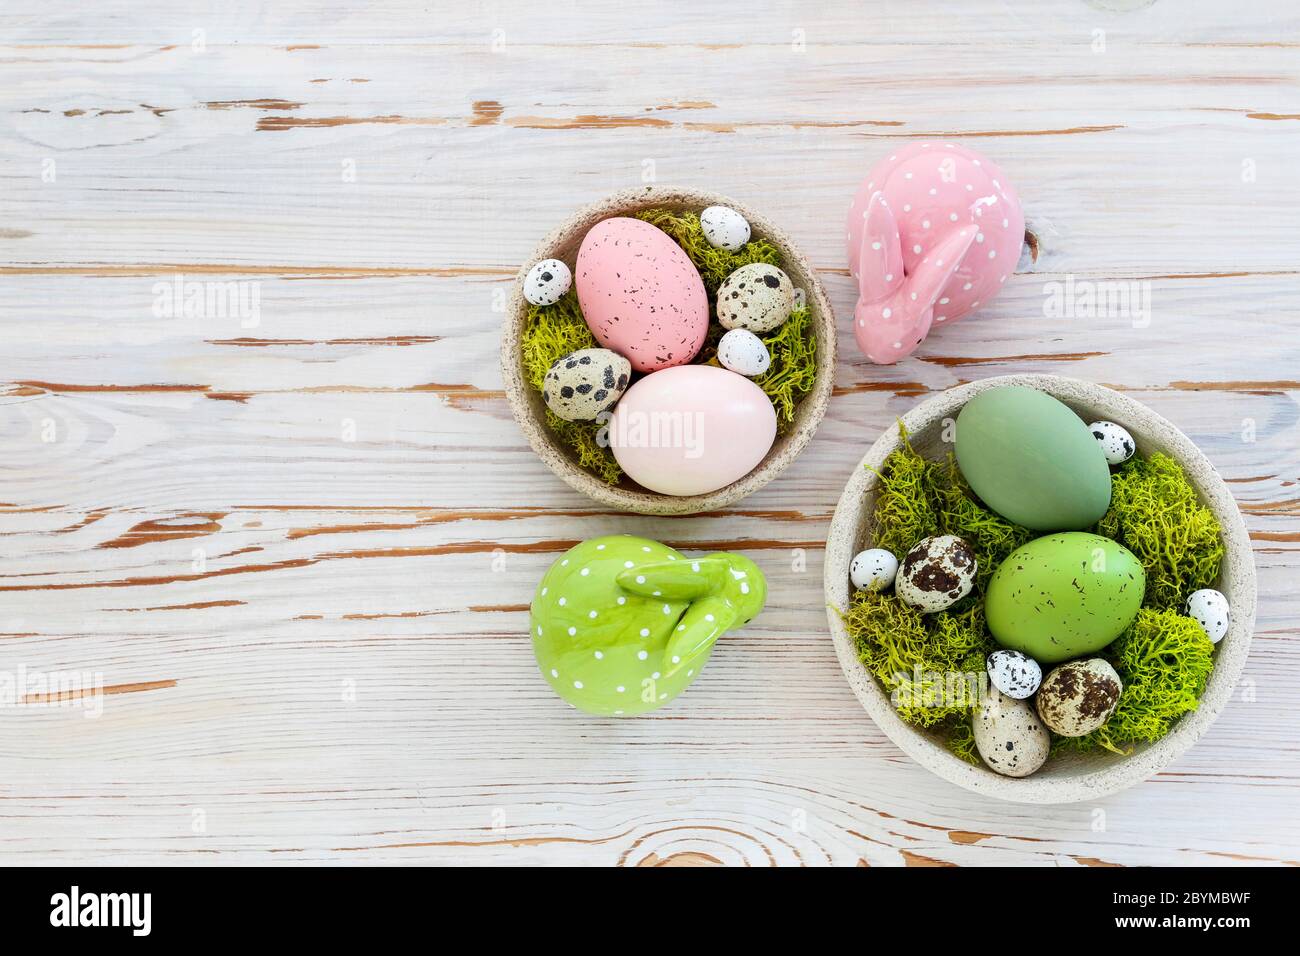 Easter decorations with eggs, moss and ceramic figurines on white wooden table. Festive time Stock Photo